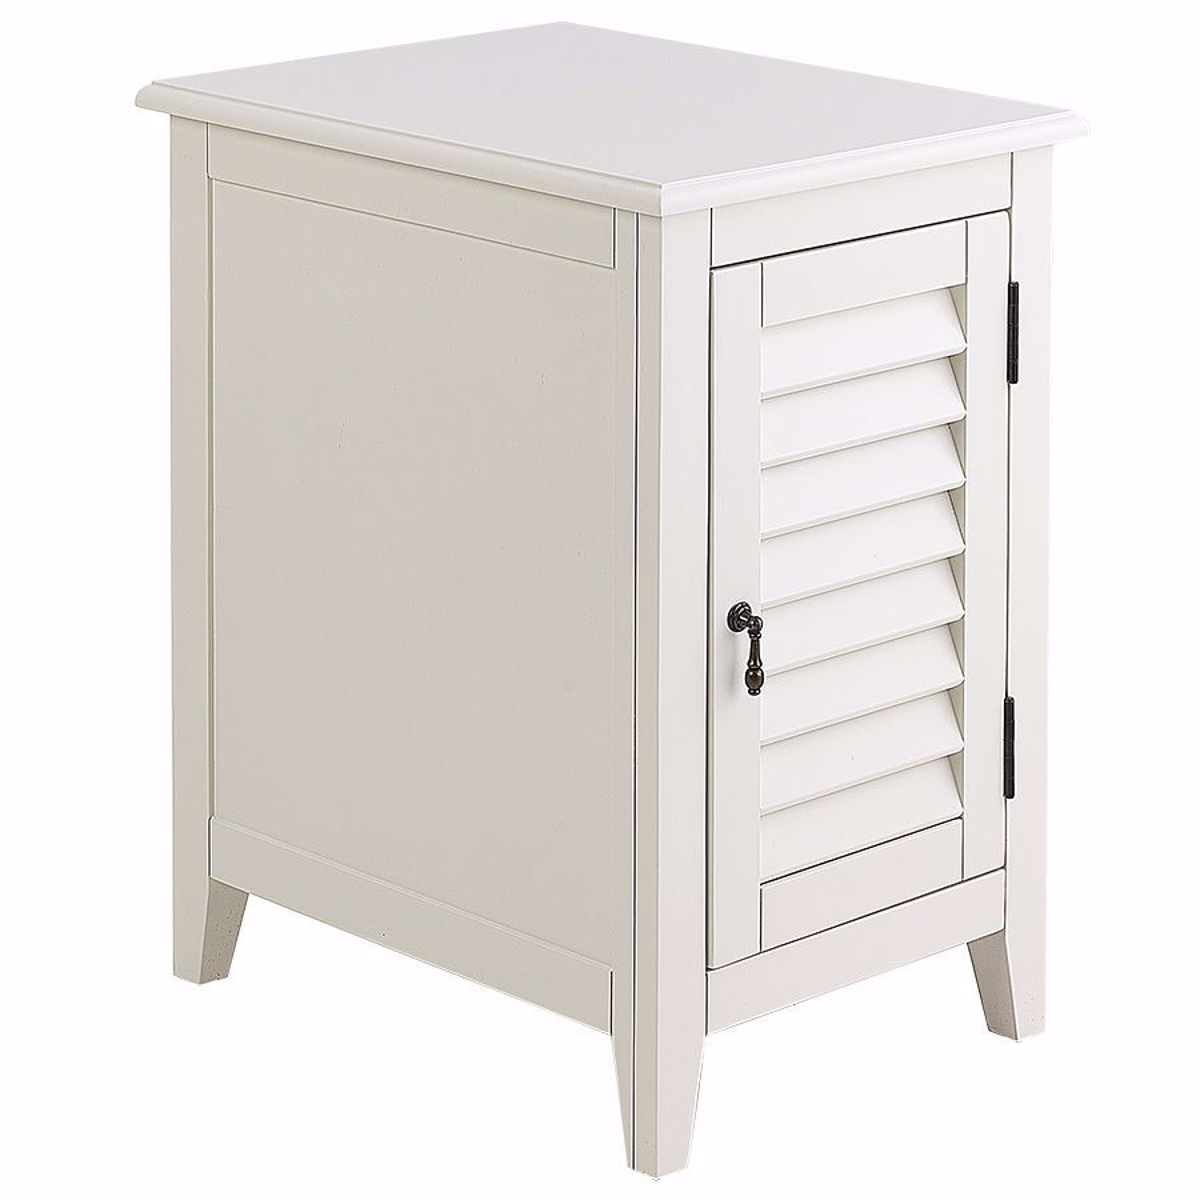 Picture of Plantation White Chairside Cabinet